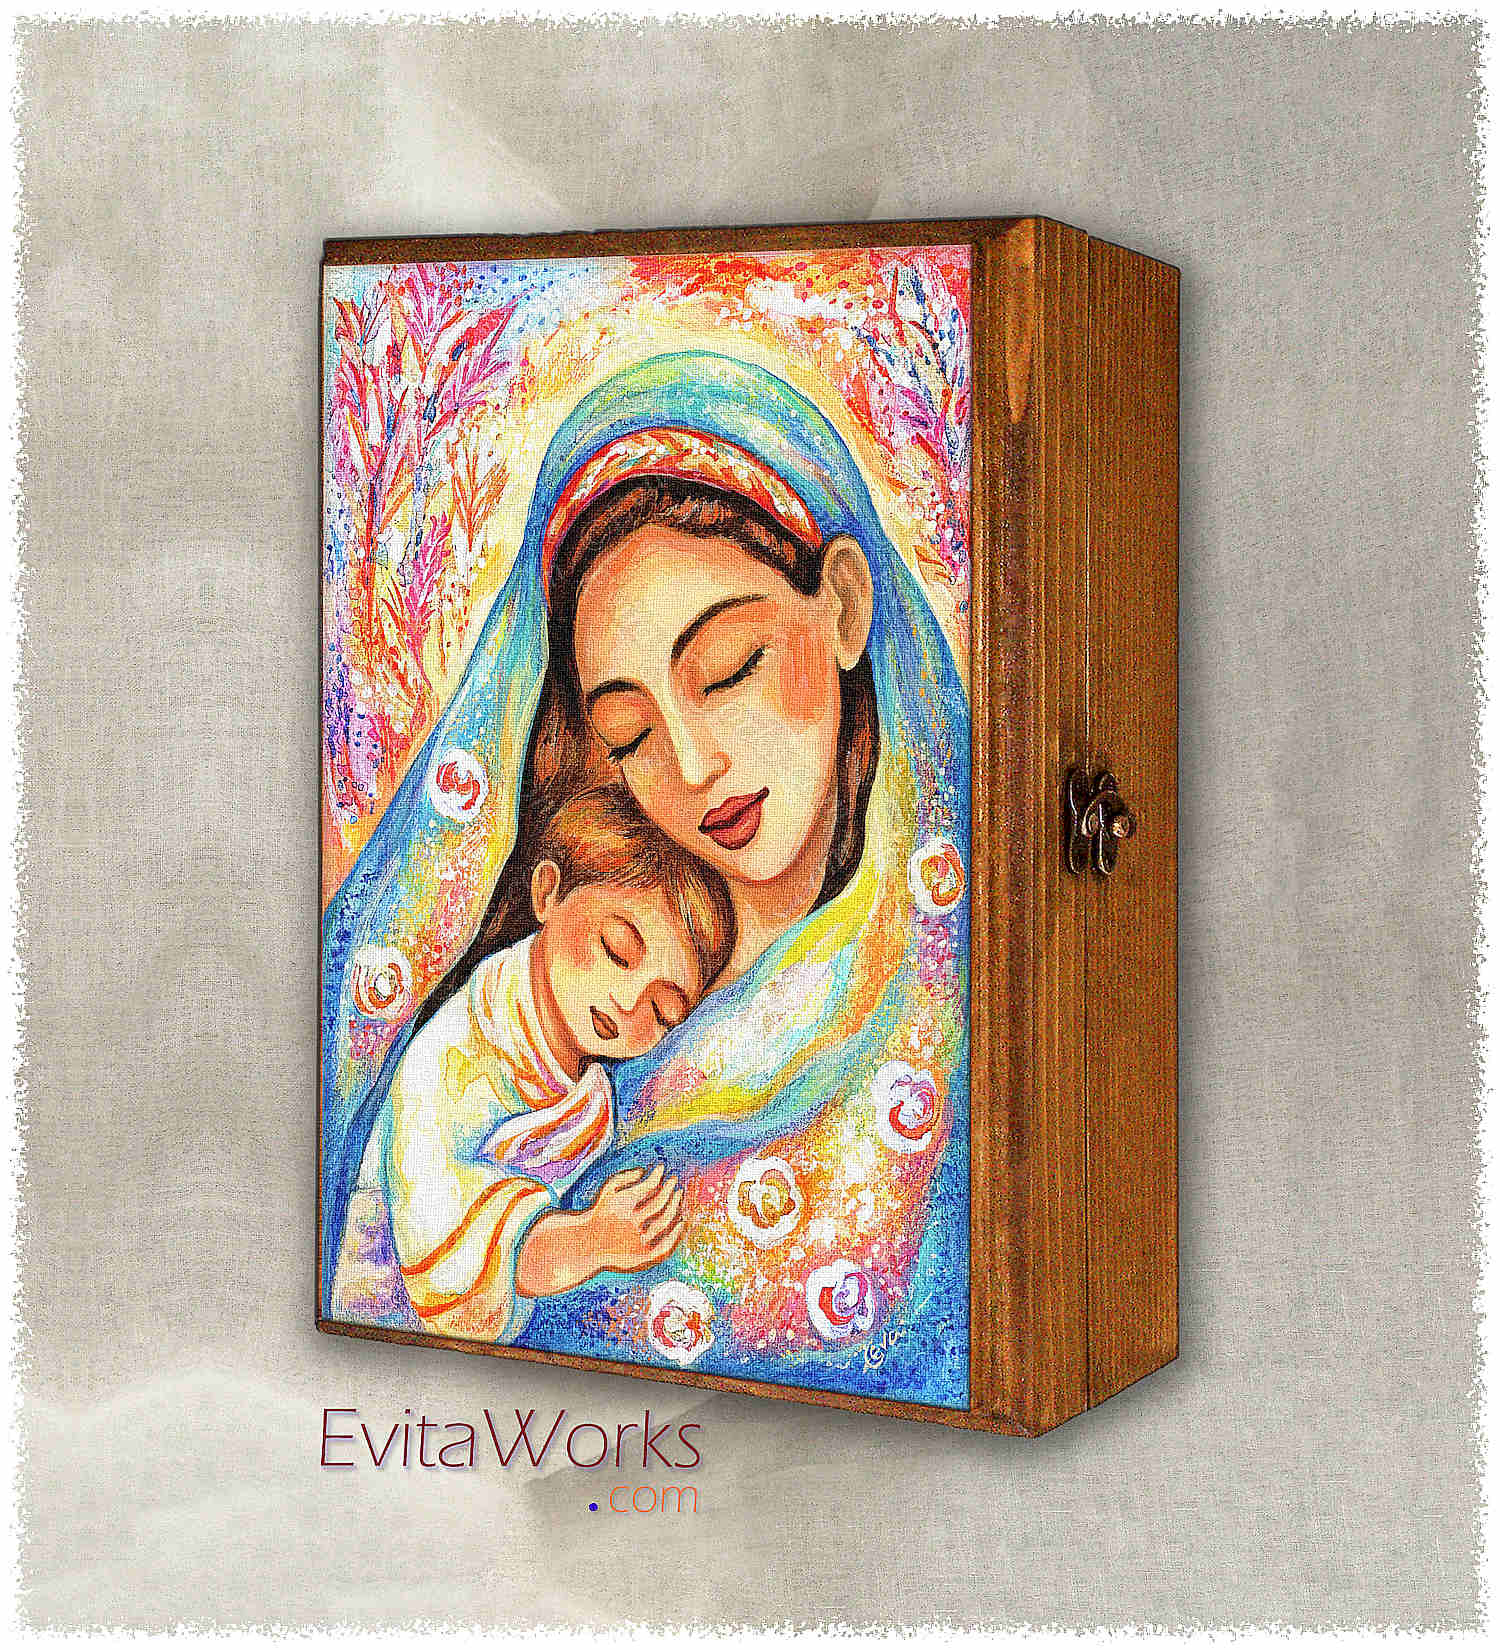 Hit to learn about "Inner Silence, mother and child" on jewelboxes